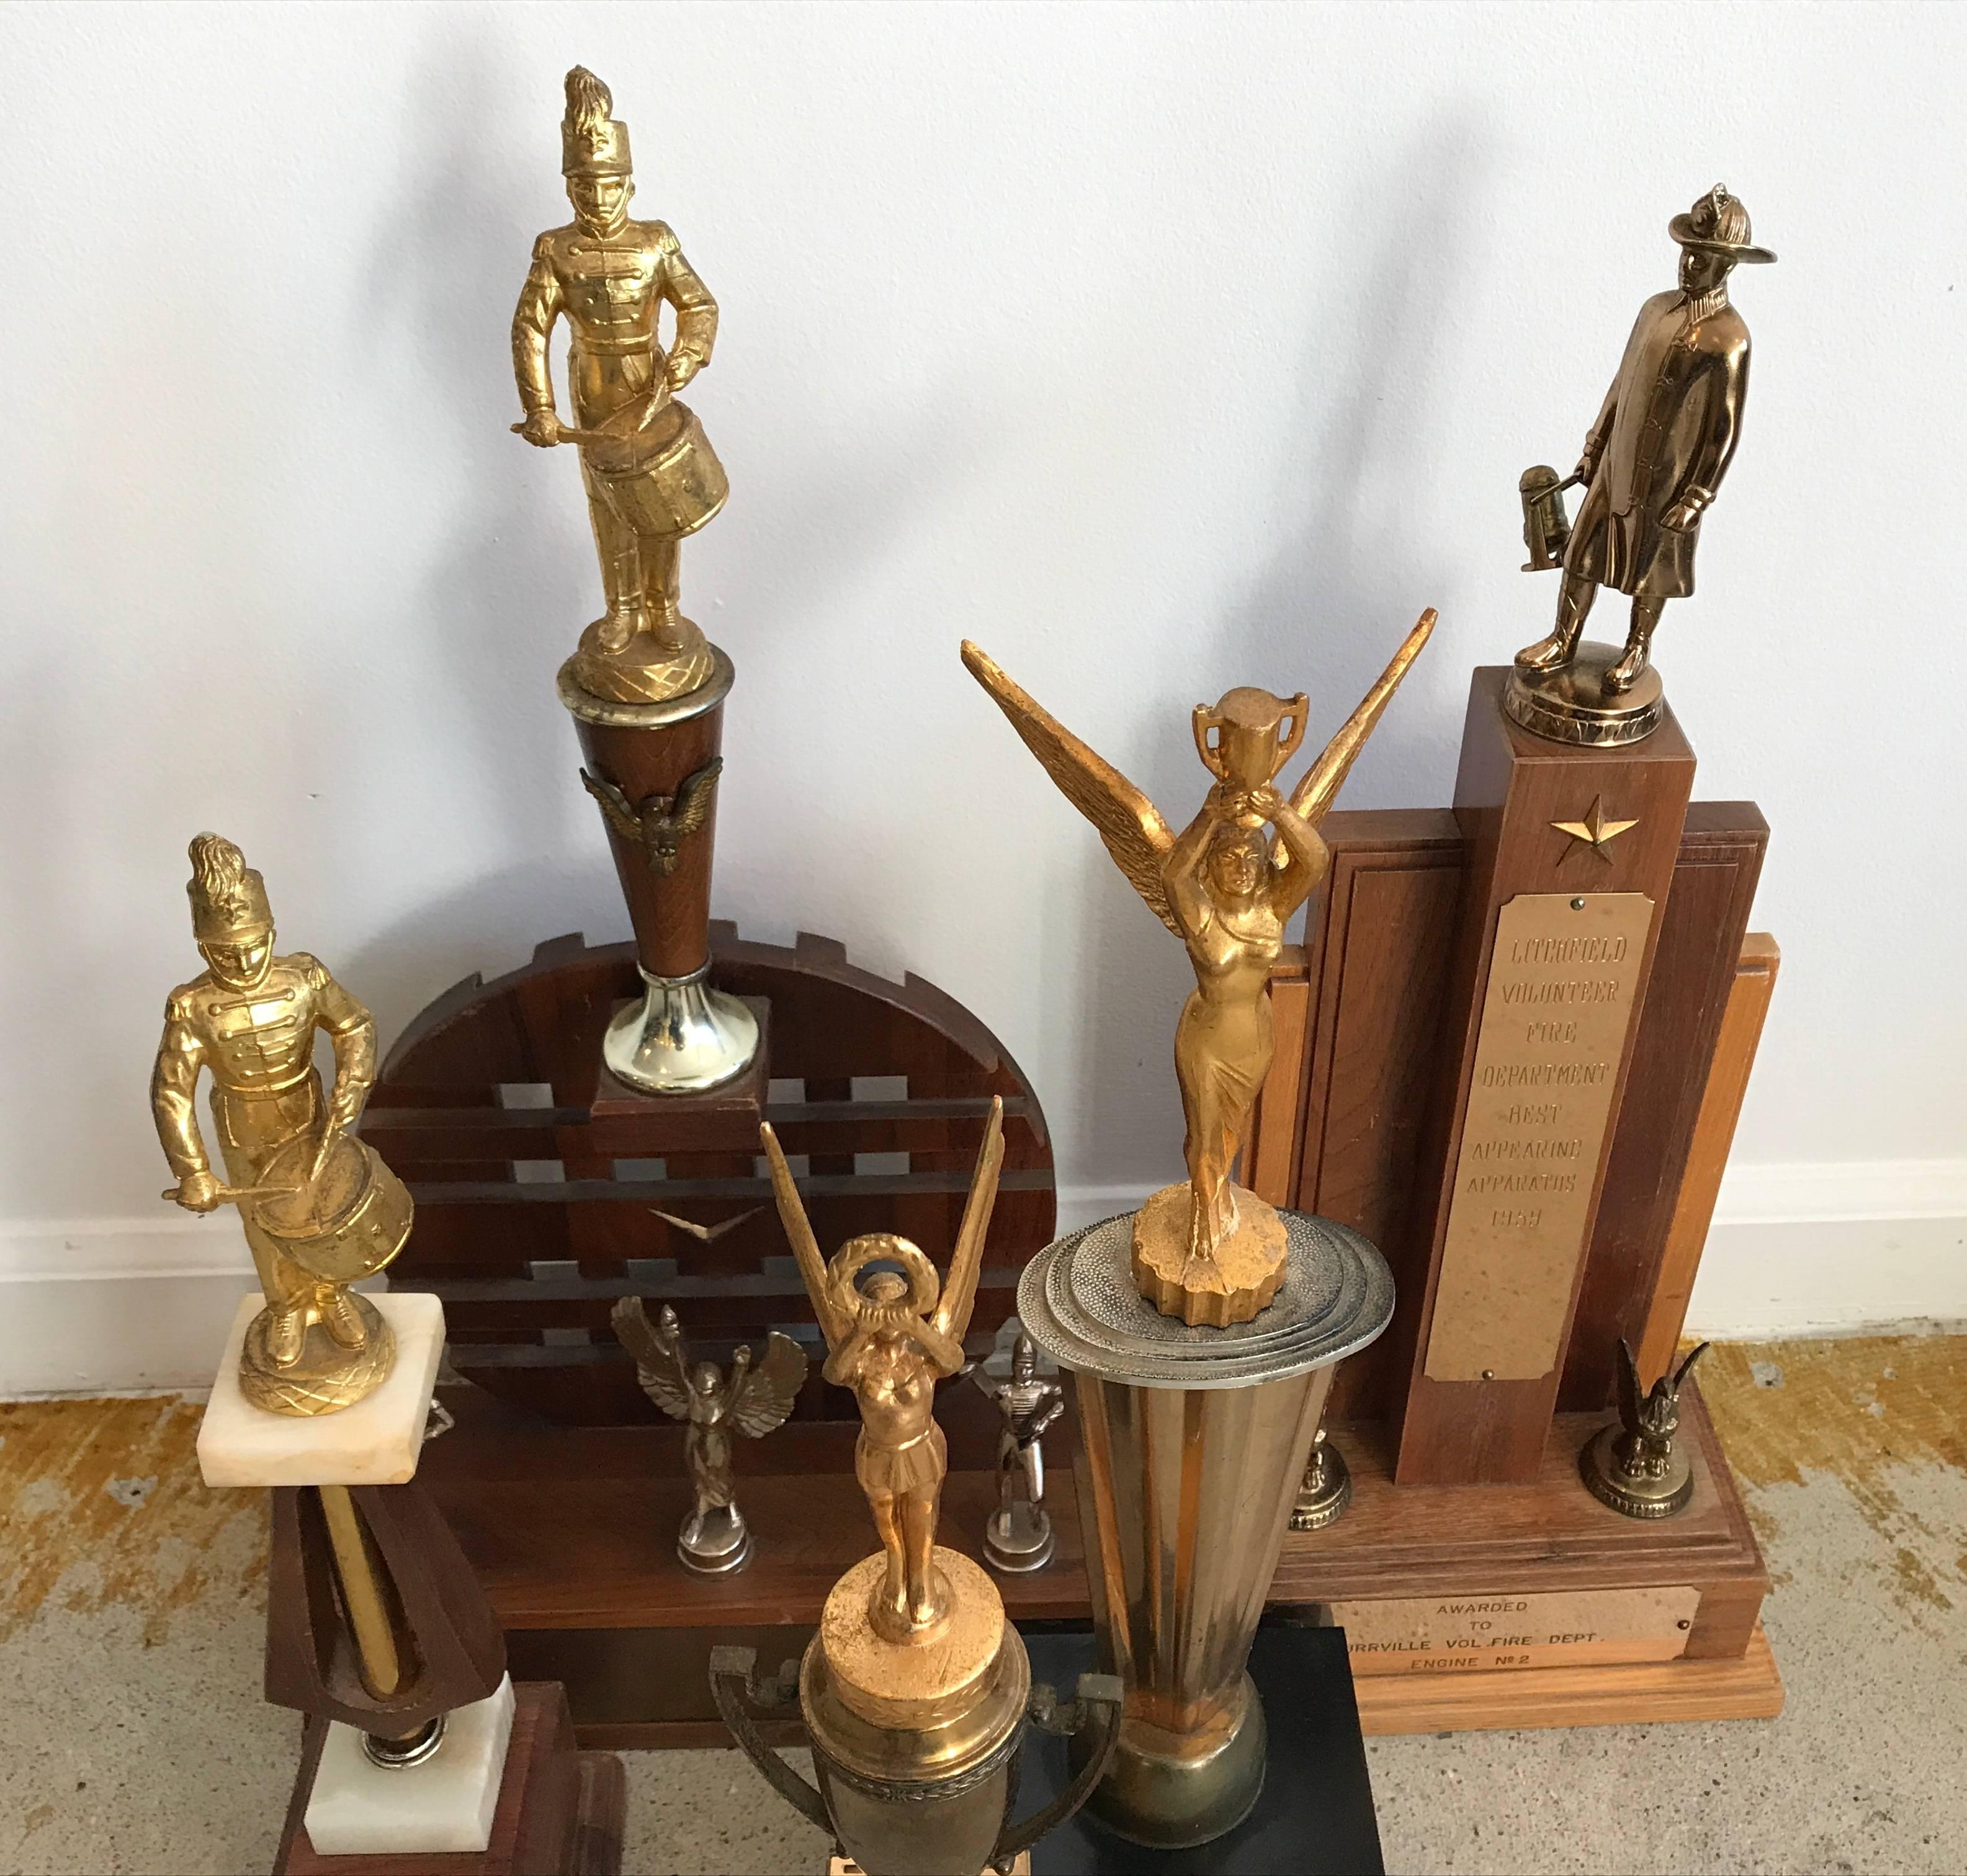 Group of vintage firefighter trophies from Litchfield CT firehouse that has since closed. All date back from the late 1950s. All wood construction and metal figurines, smallest trophy in front has bakelite sides.